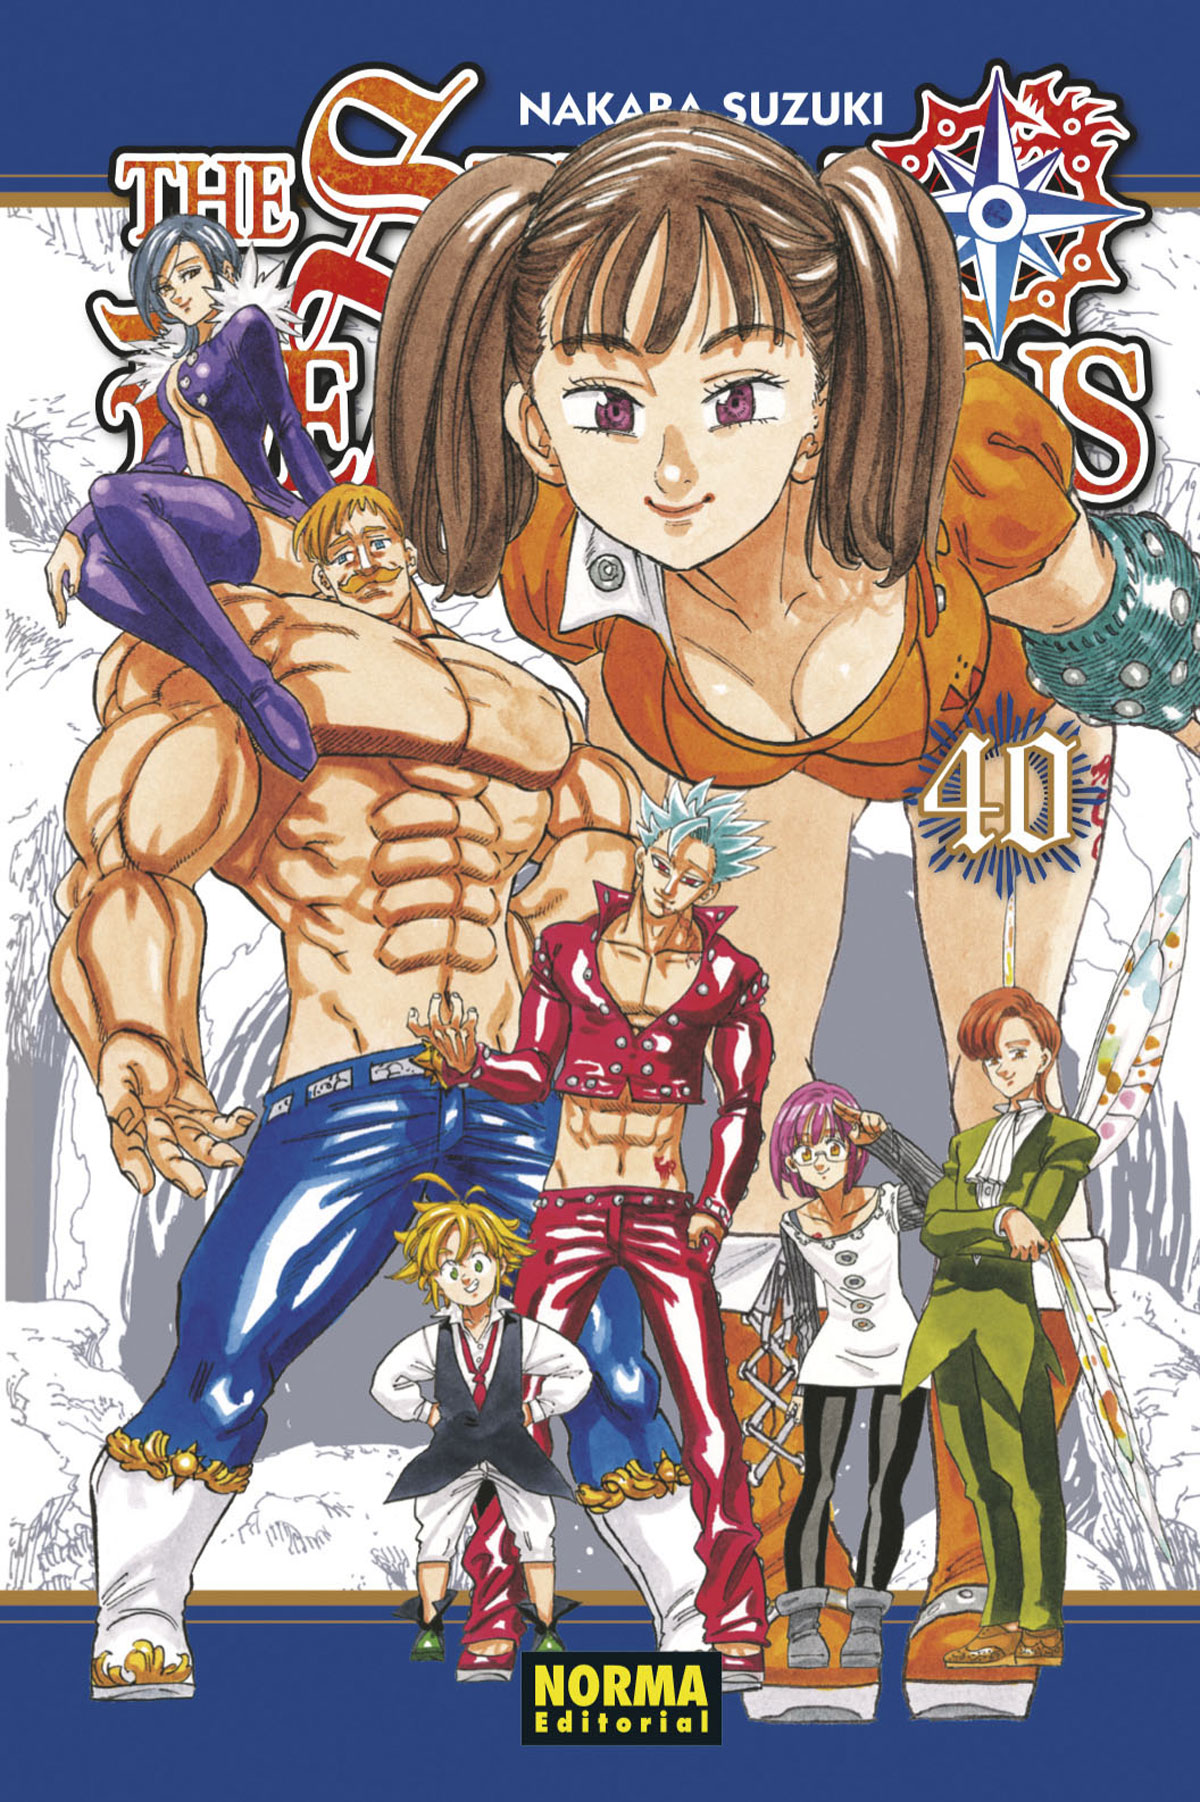 THE SEVEN DEADLY SINS #40